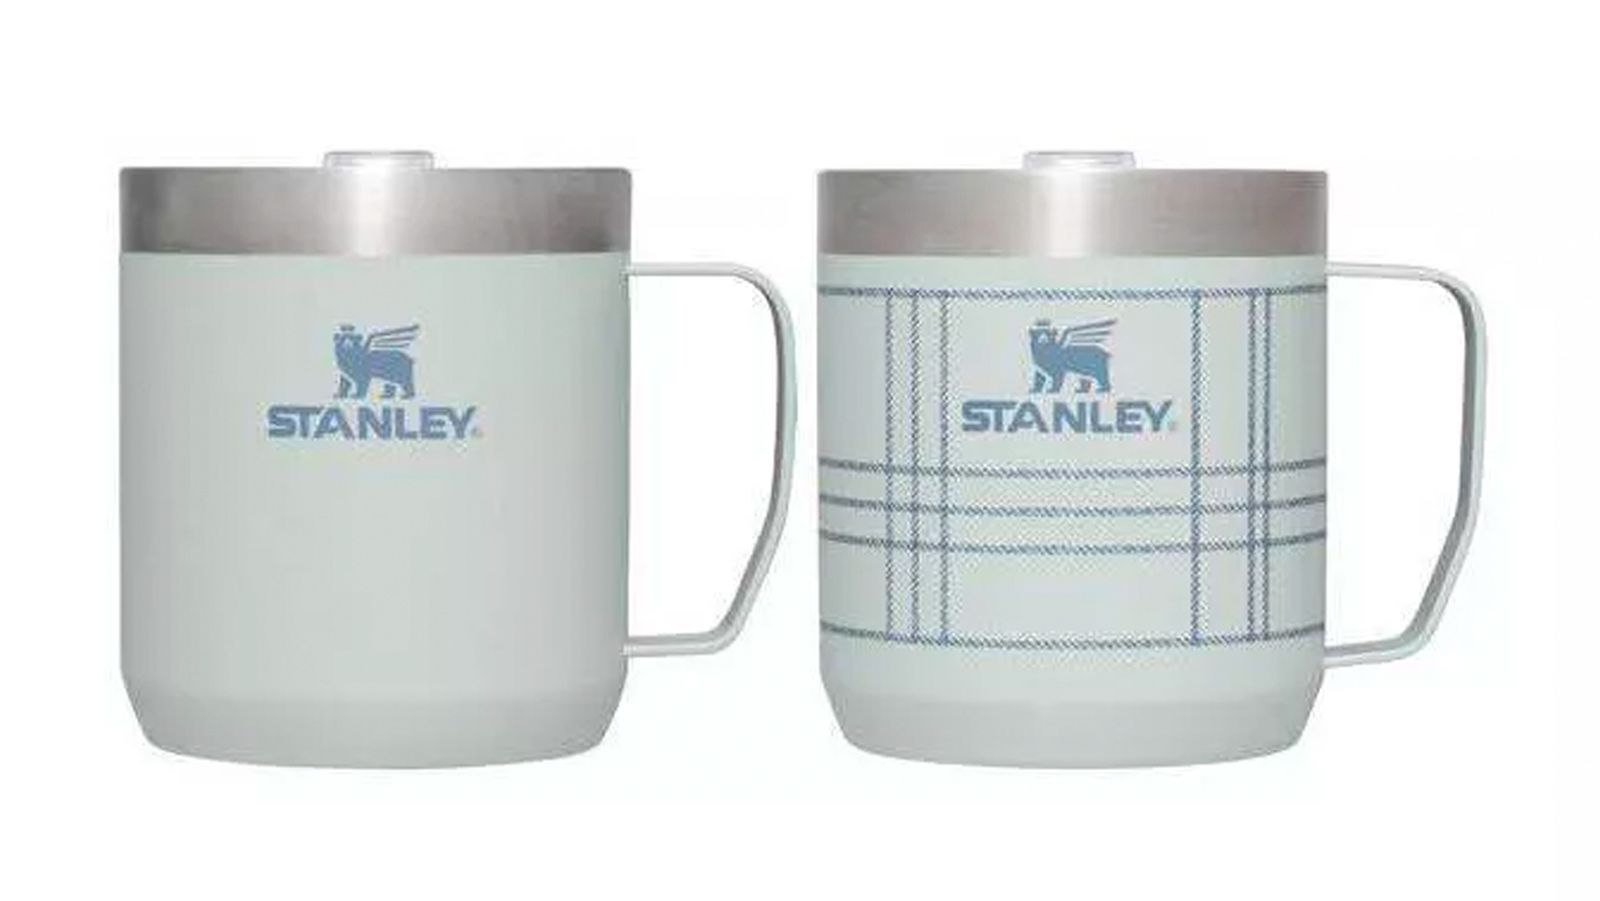 When is the next Stanley cup drop? Why do Utah moms love Stanley